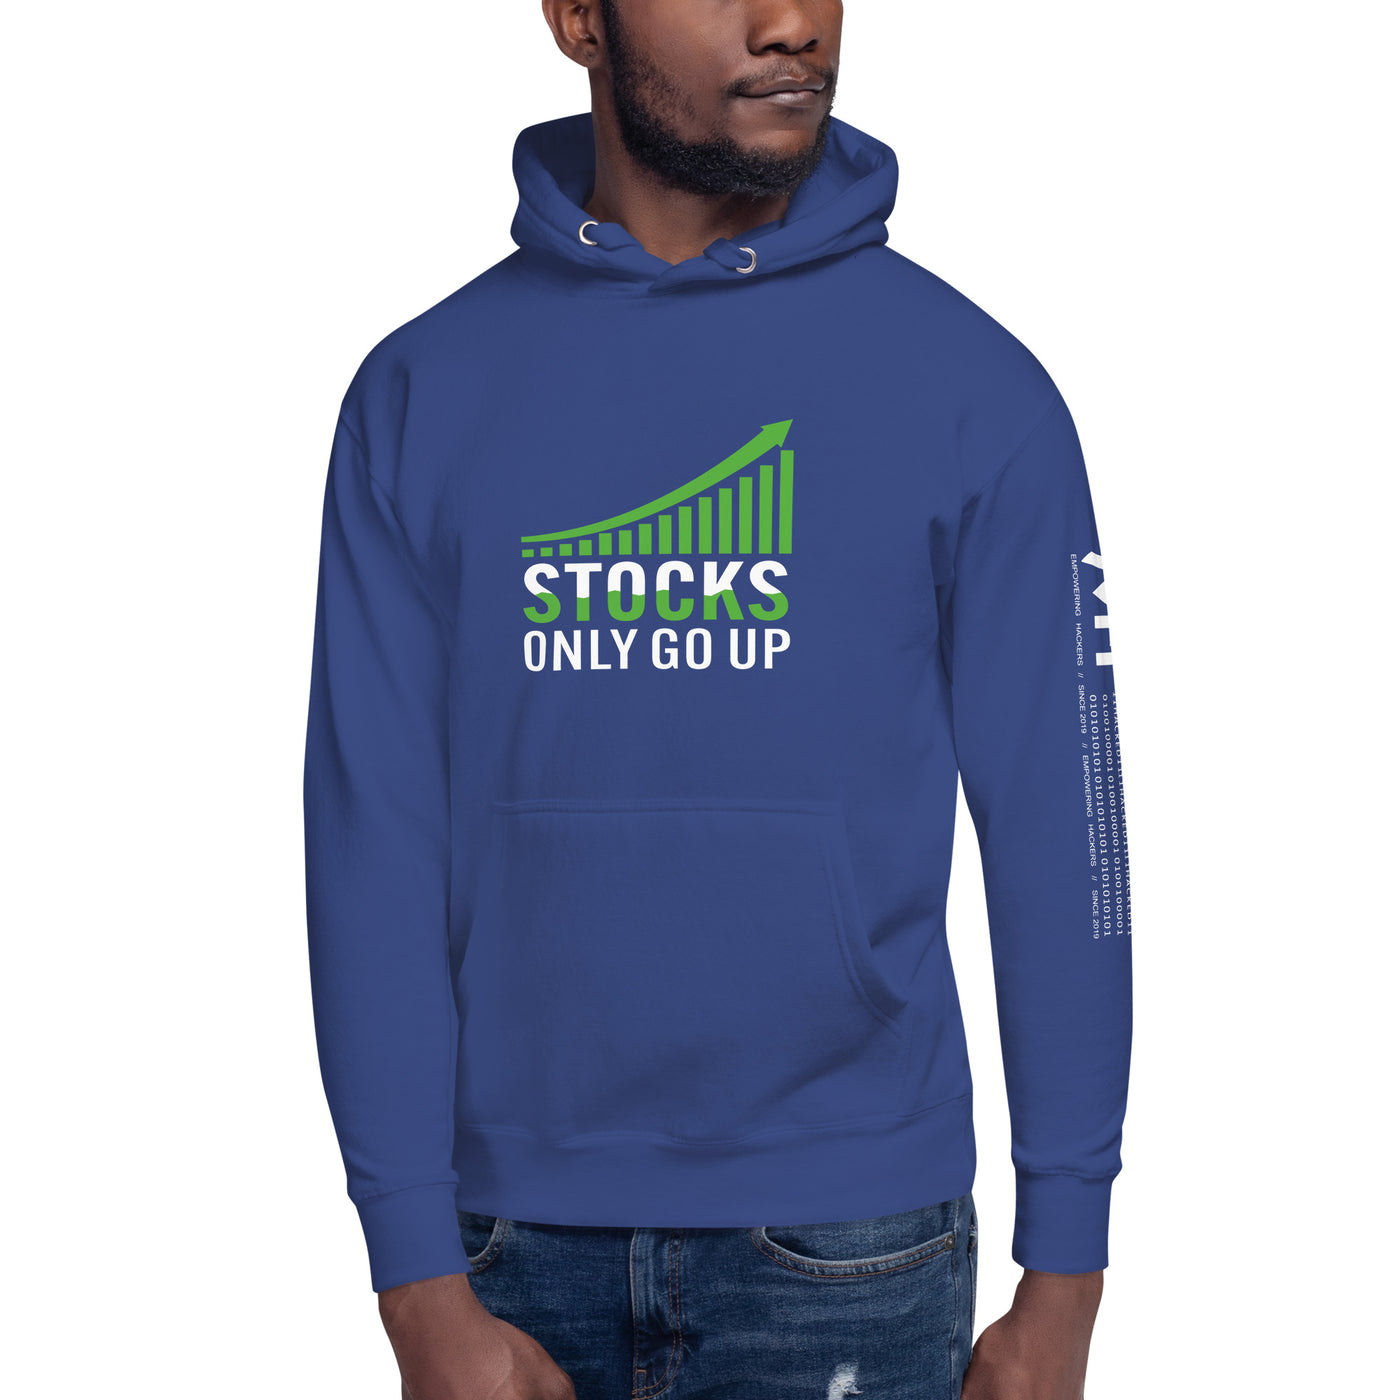 Stocks only Go up - Unisex Hoodie